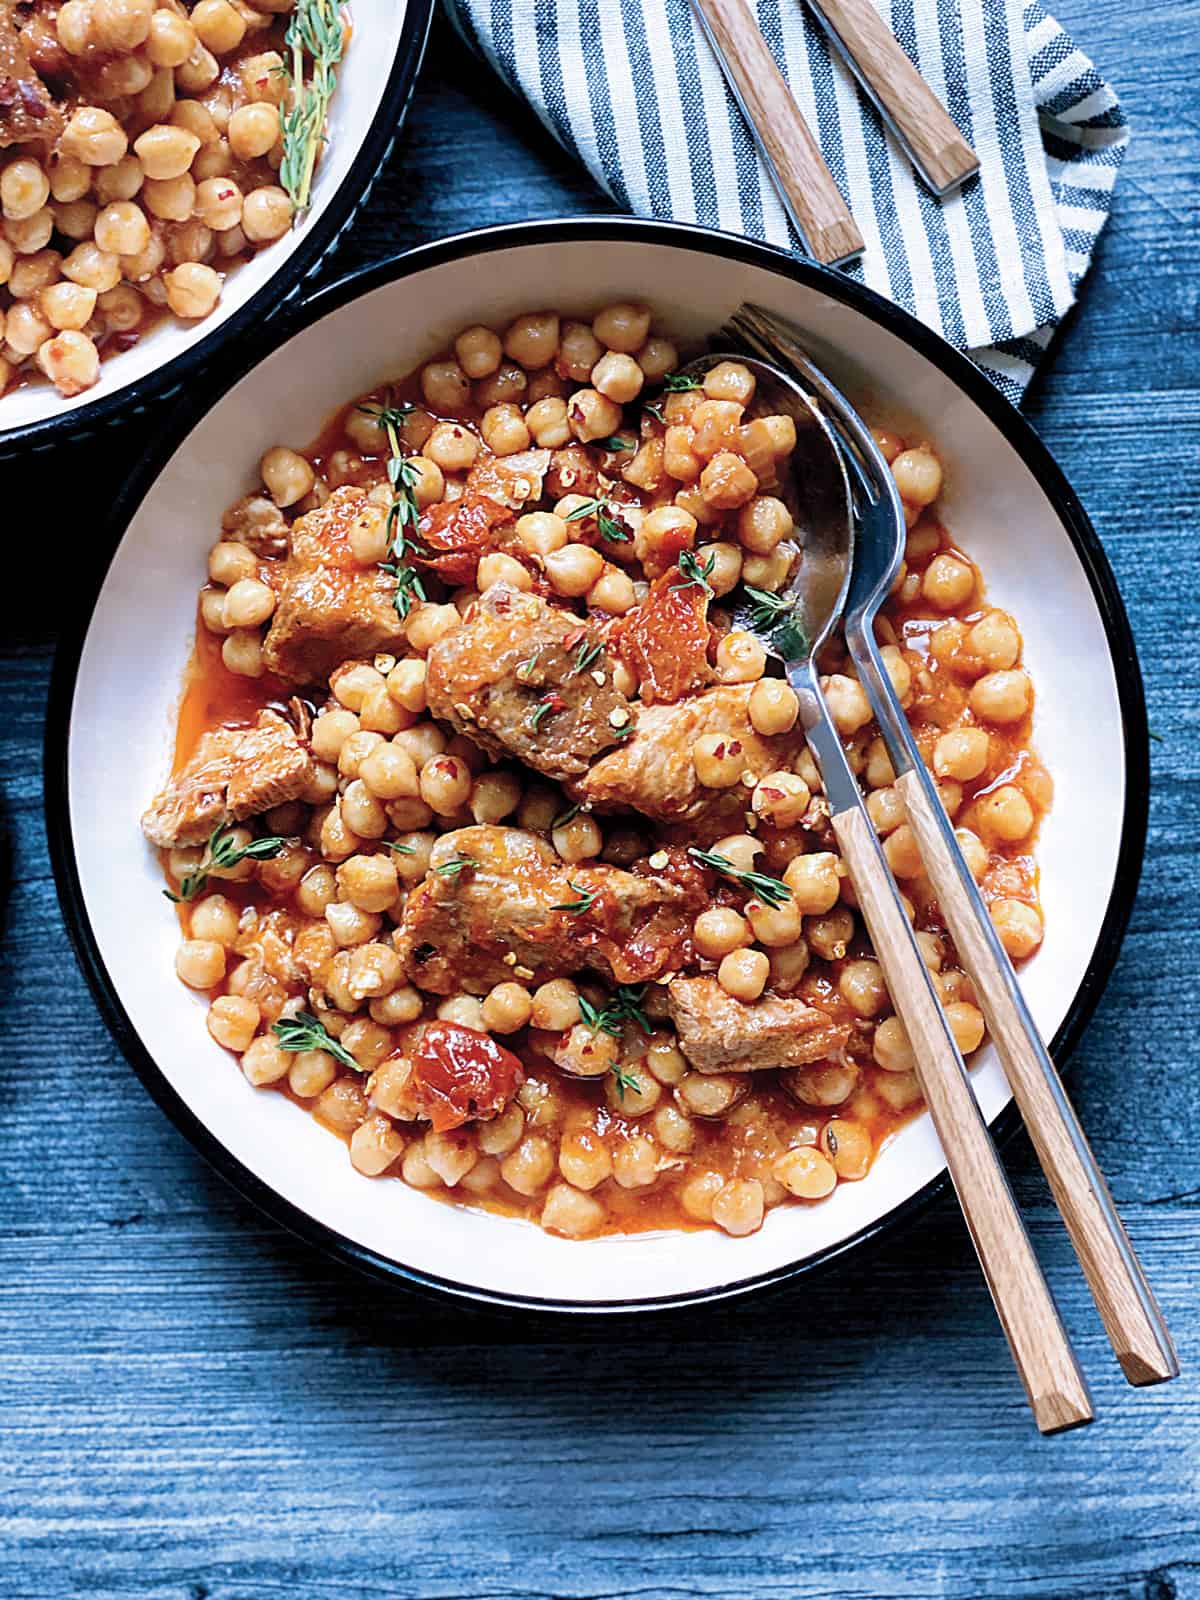 A plate with chickpea and pork stew.